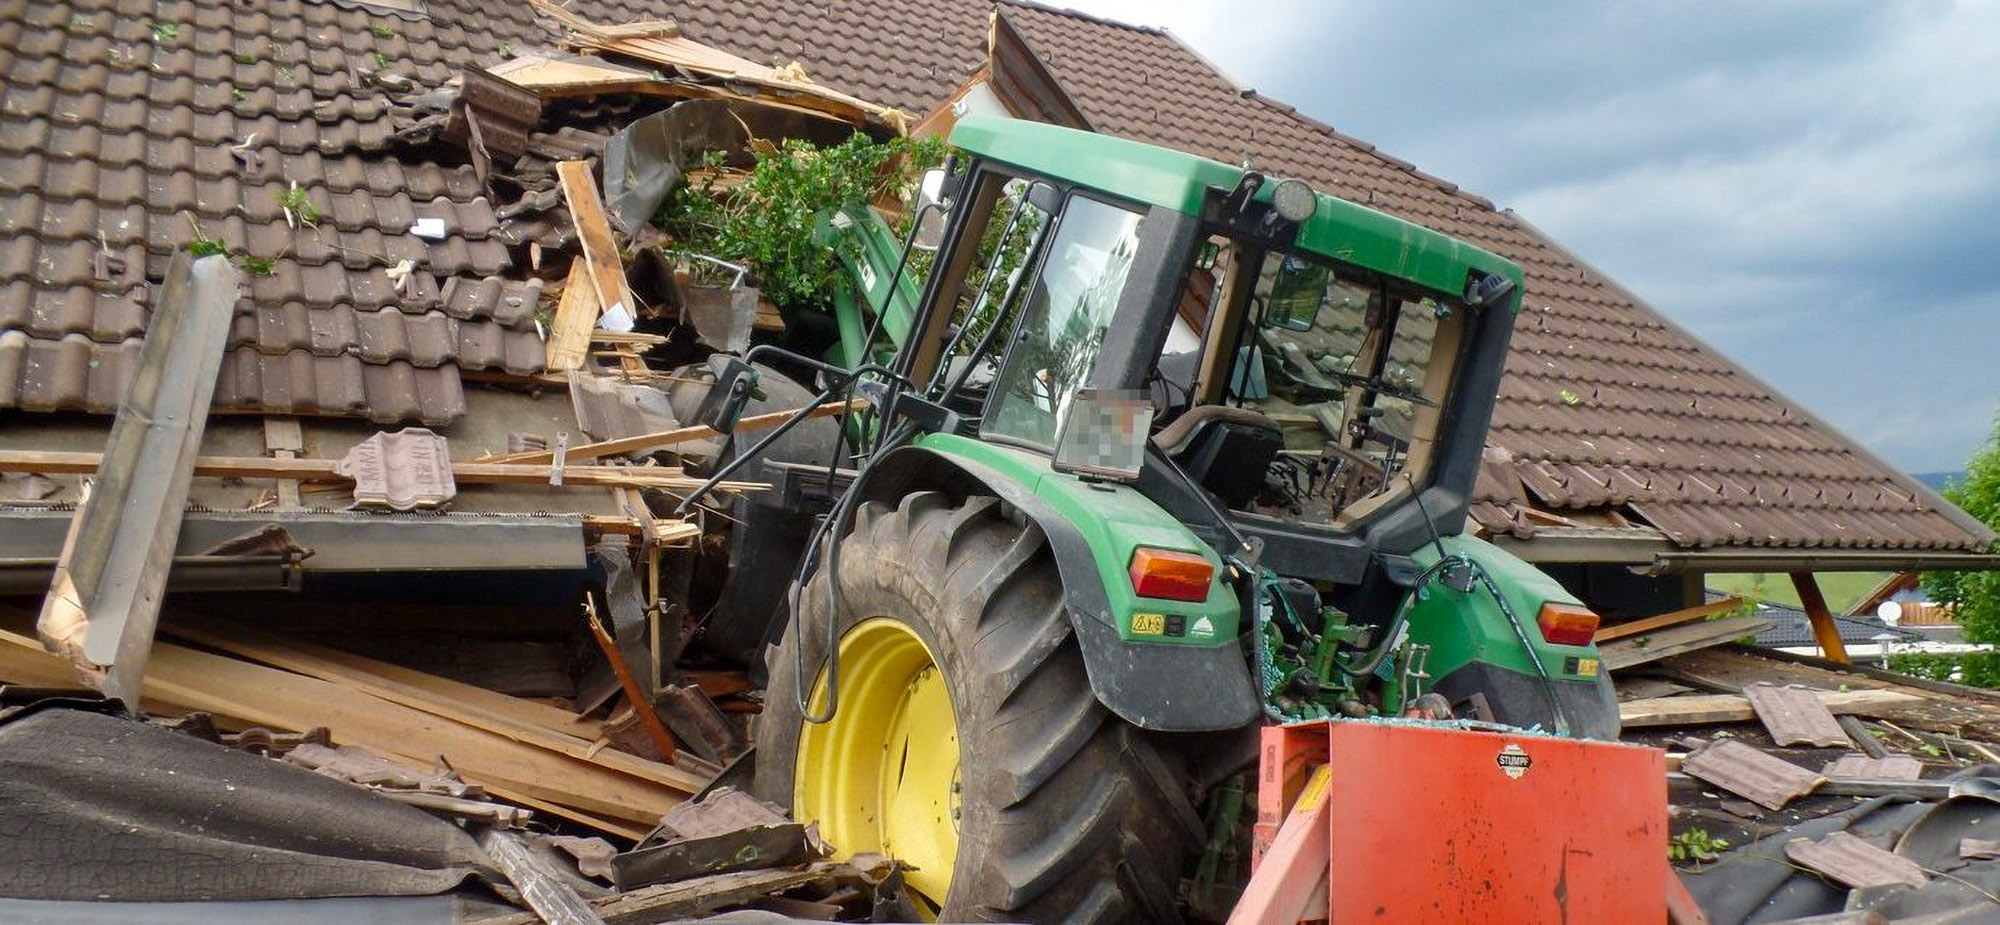 Read more about the article FRIGHT ON THE TILES: Tractor Girl Wrecks Family Home